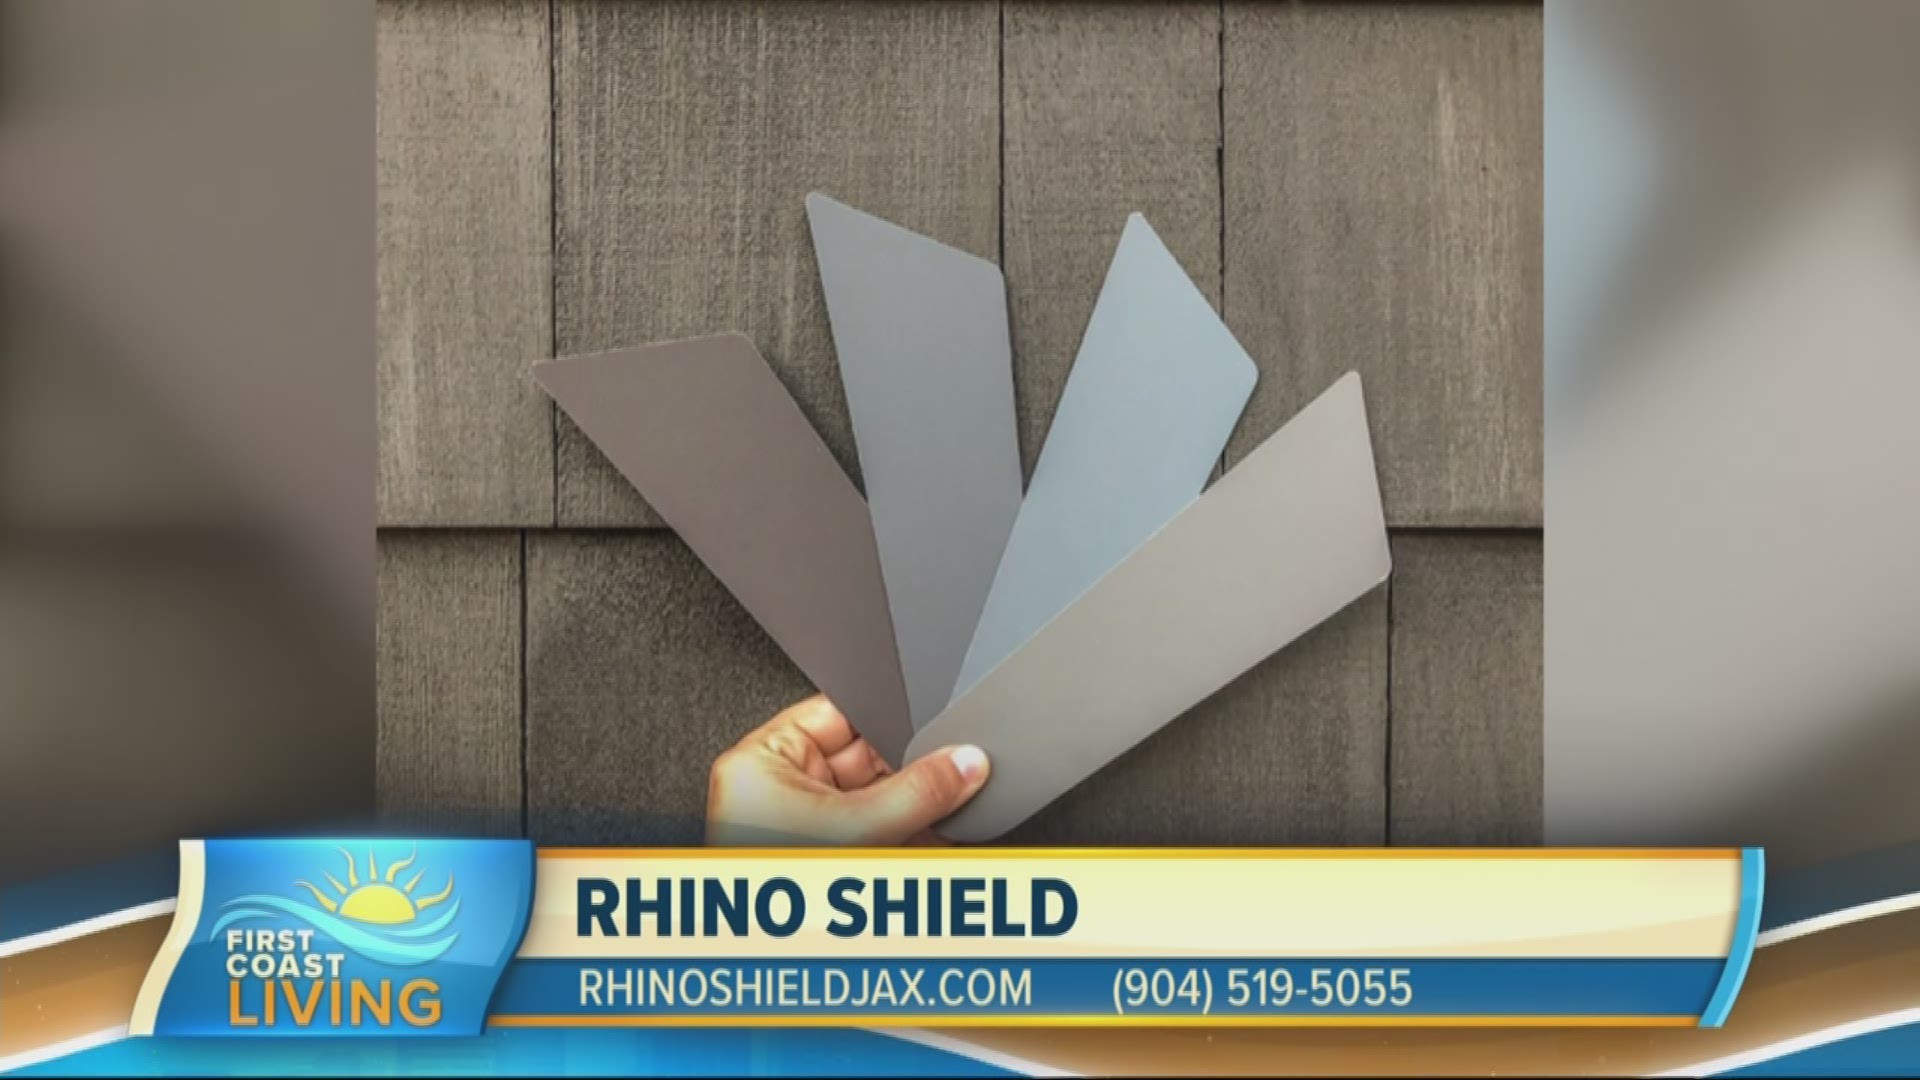 Rhino Shield comes in any color and works on a variety of surfaces!